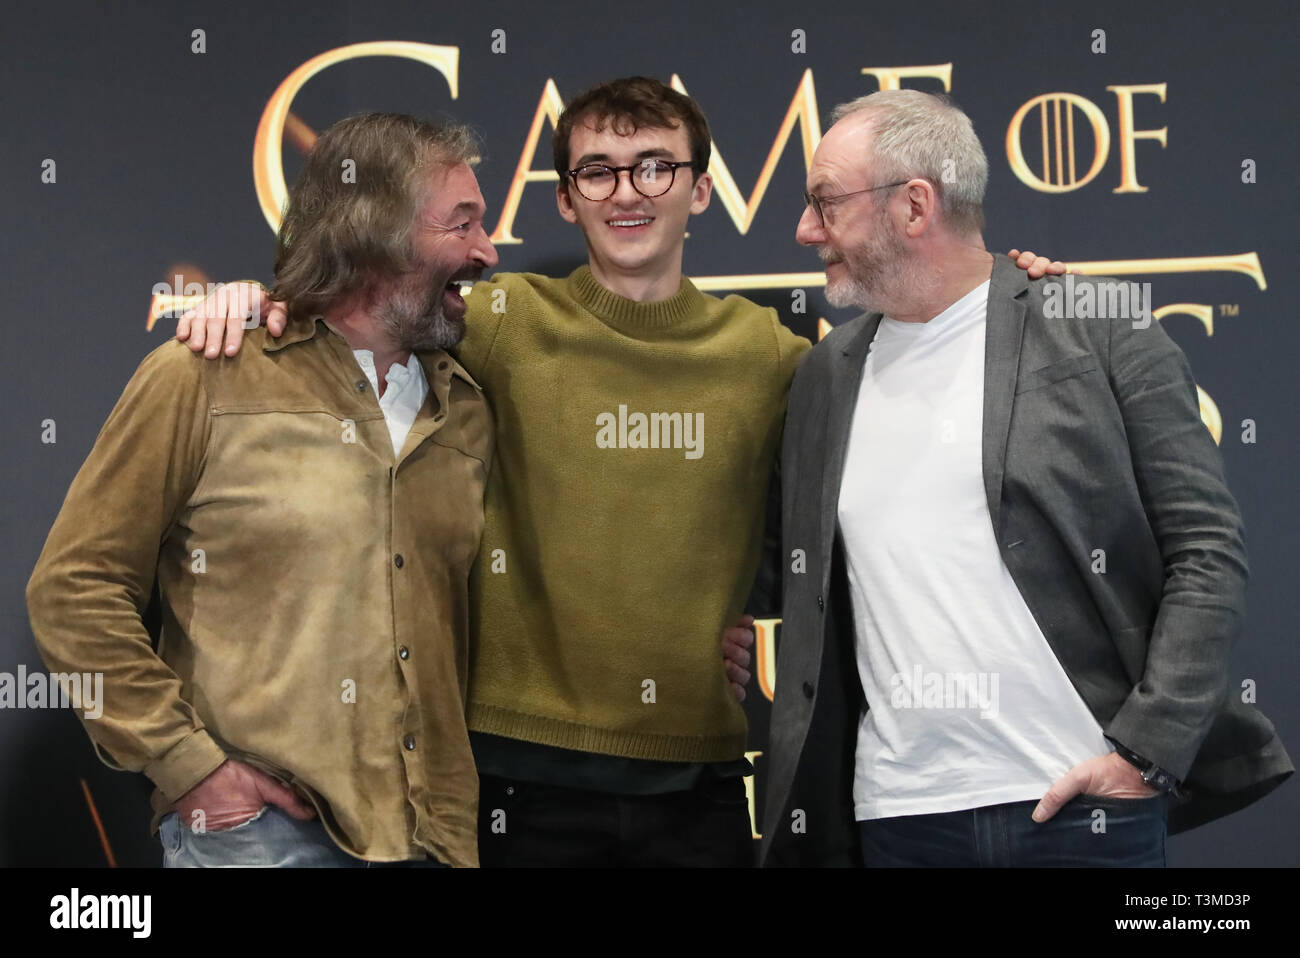 Left to right; actors Ian Beattie, who plays Meryn Trant, Isaac Hempstead Wright, who plays Bran Stark, and Liam Cunningham, who plays Davos Seaworth, at the launch of the Game of Thrones touring exhibition at the Titanic Exhibition Centre in Belfast. Stock Photo